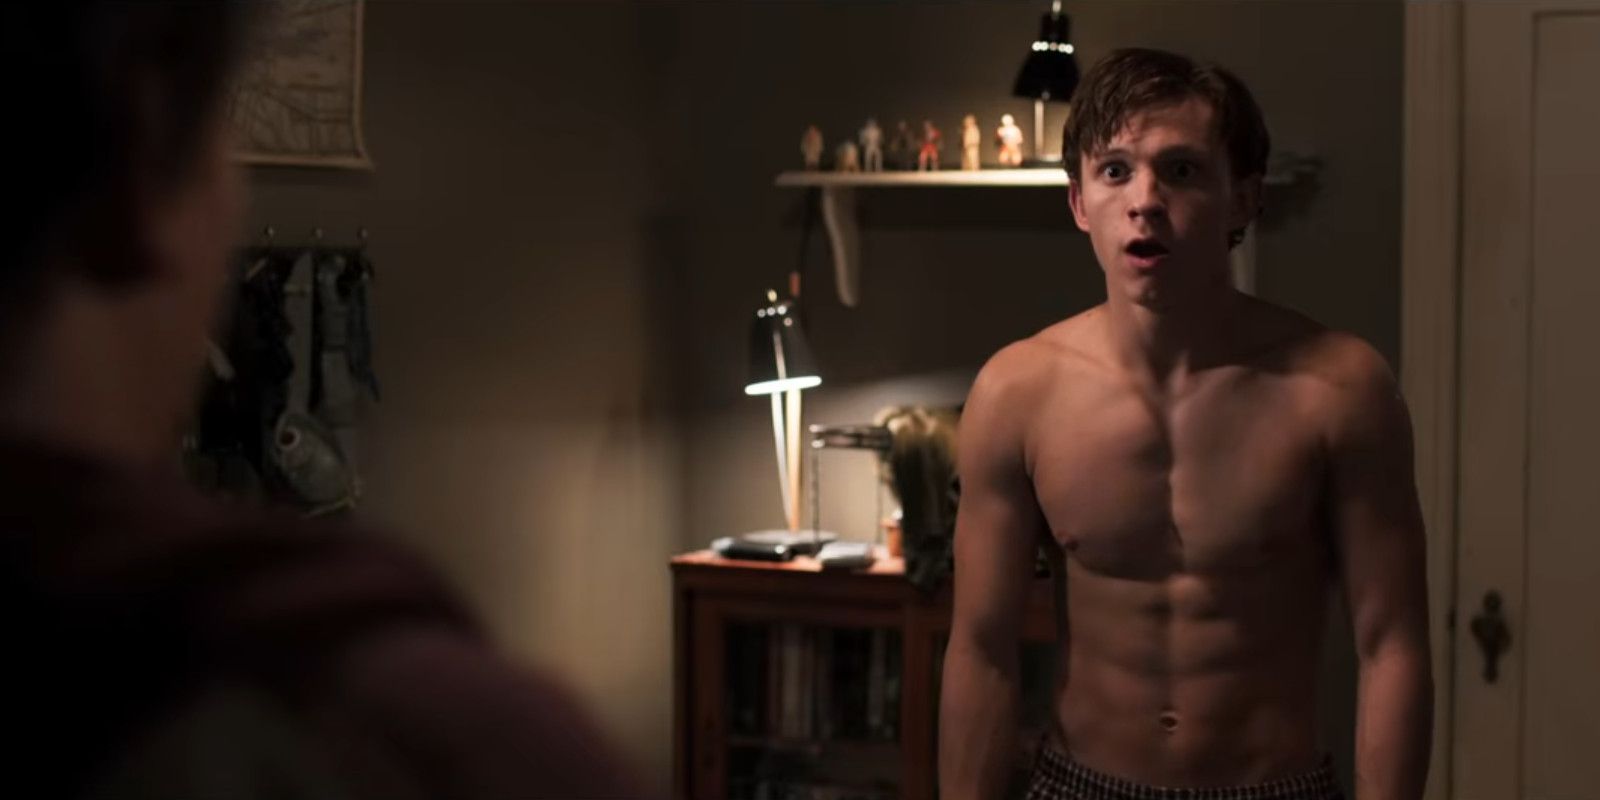 Tom Holland shirtless in Spider-Man Homecoming trailer